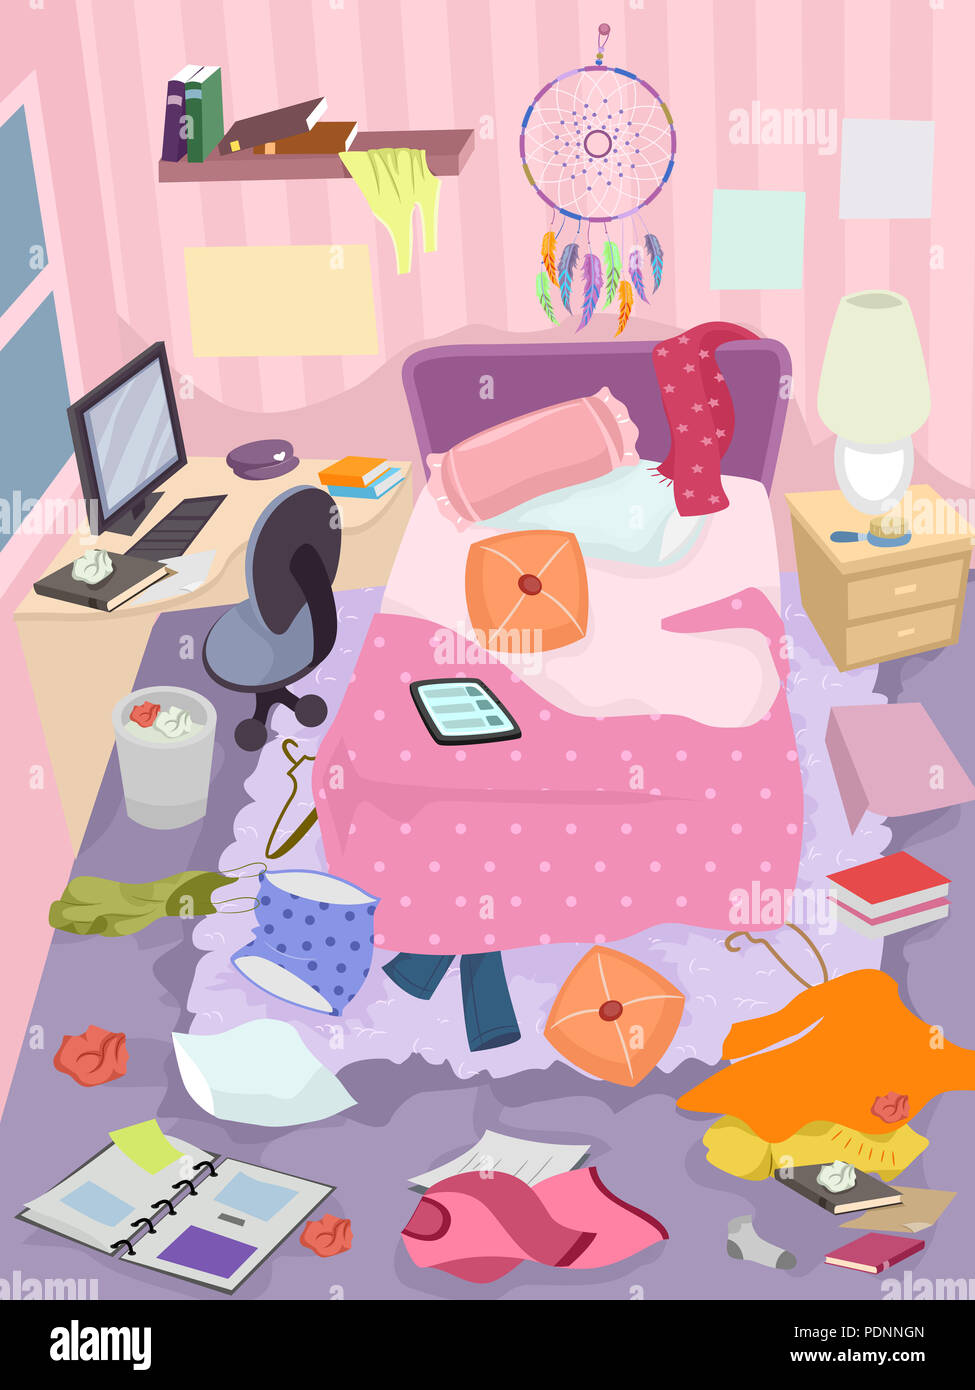 Illustration Of A Messy Bedroom Of A Girl With Clothes